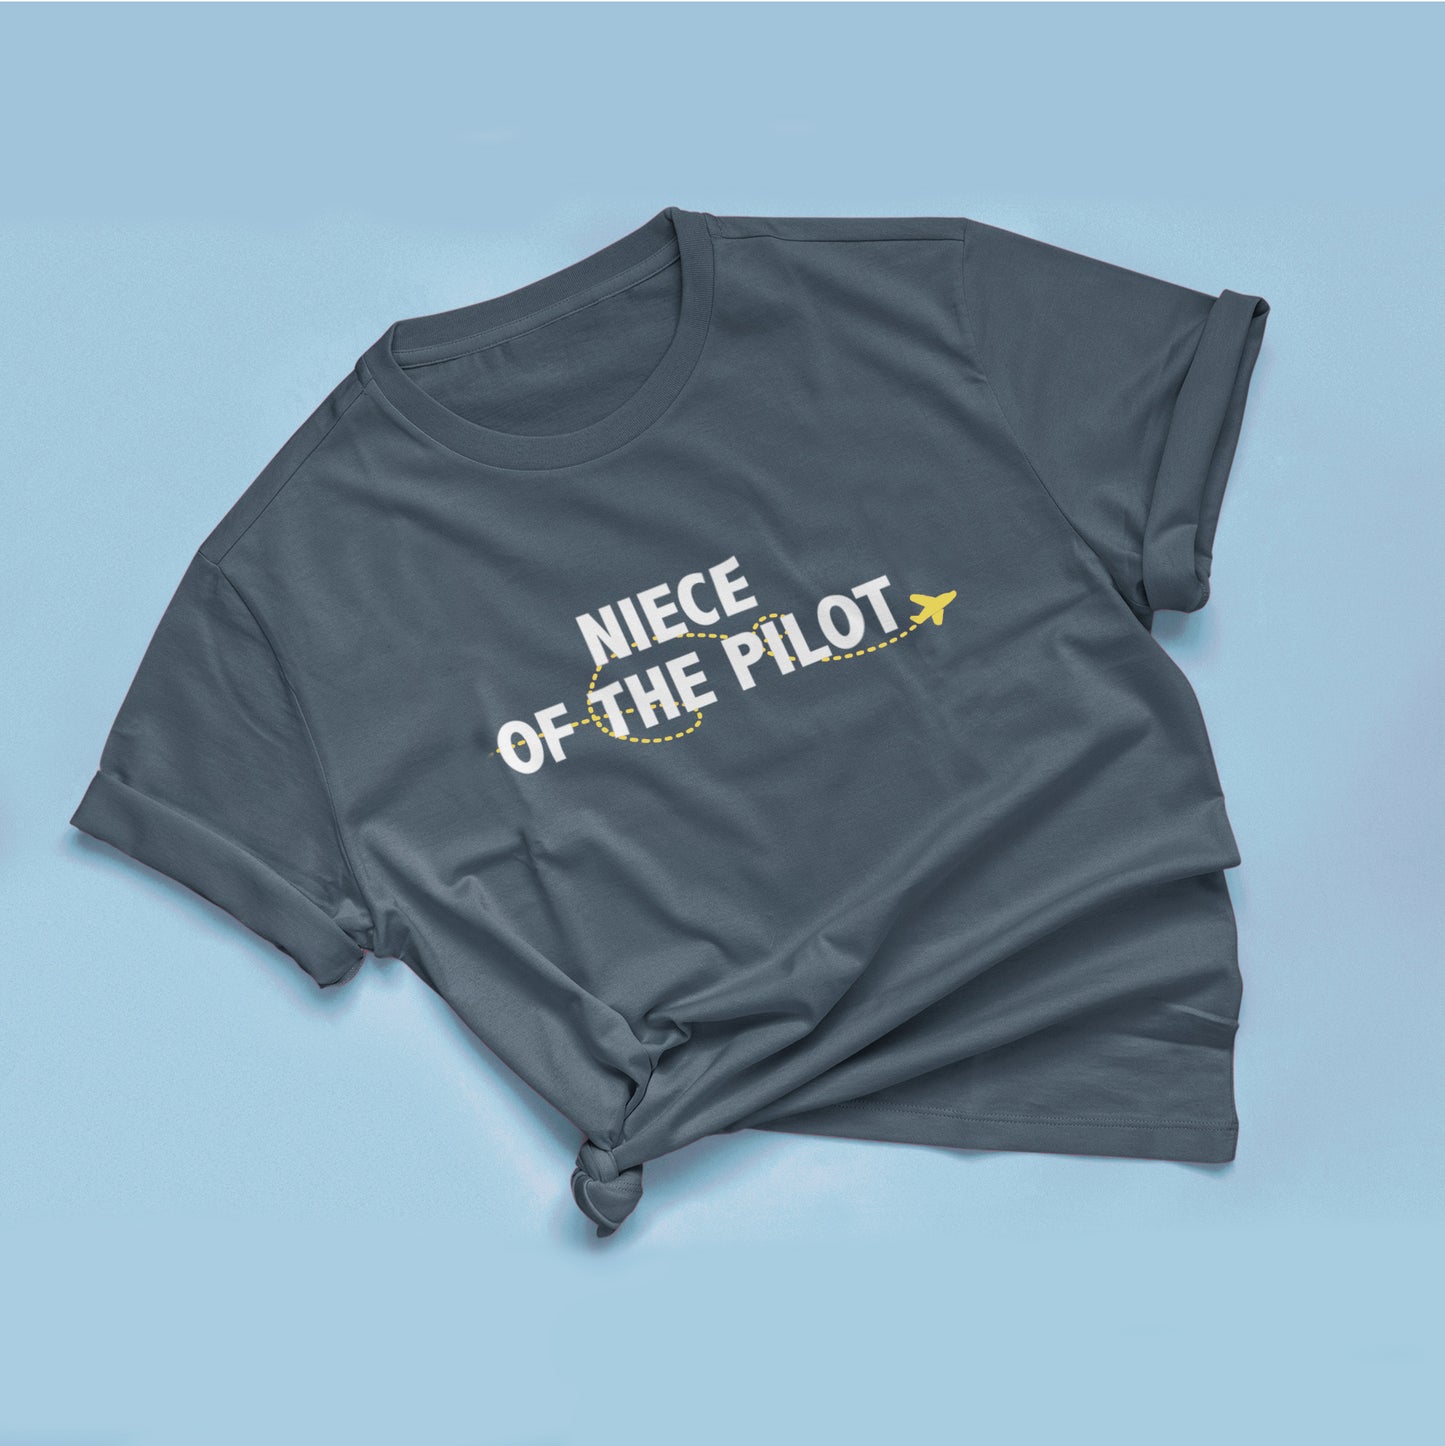 Niece of the/a Pilot - Youth T-shirt